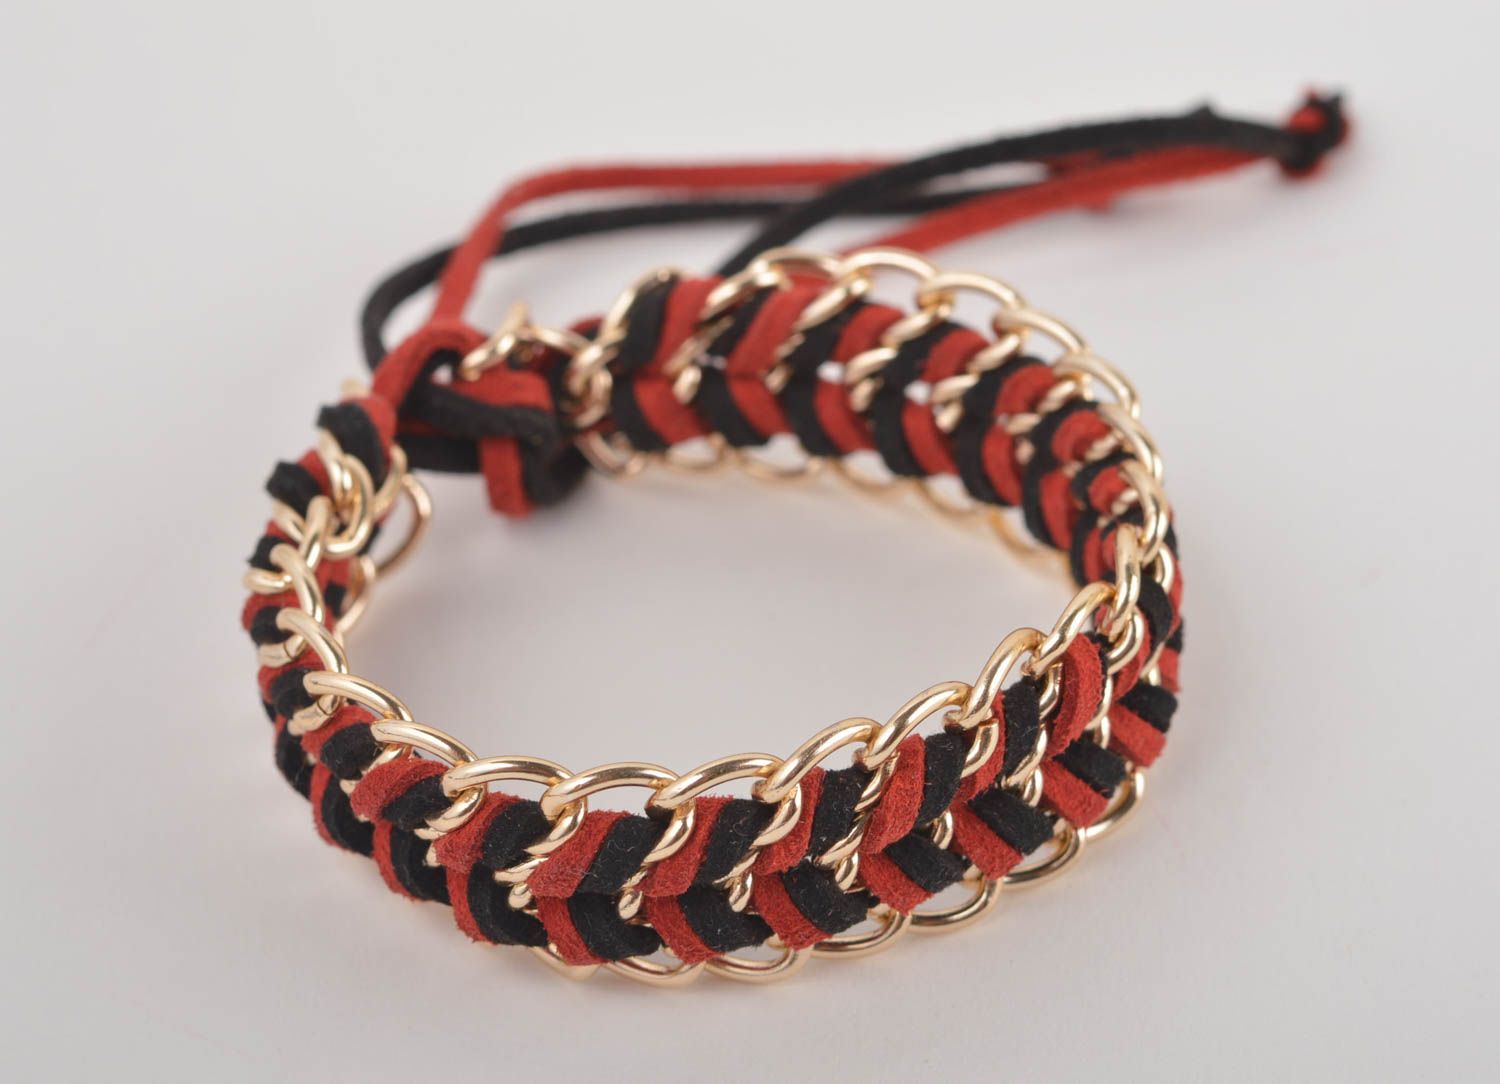 Chain bracelet handmade leather jewelry leather goods fashion accessories photo 2